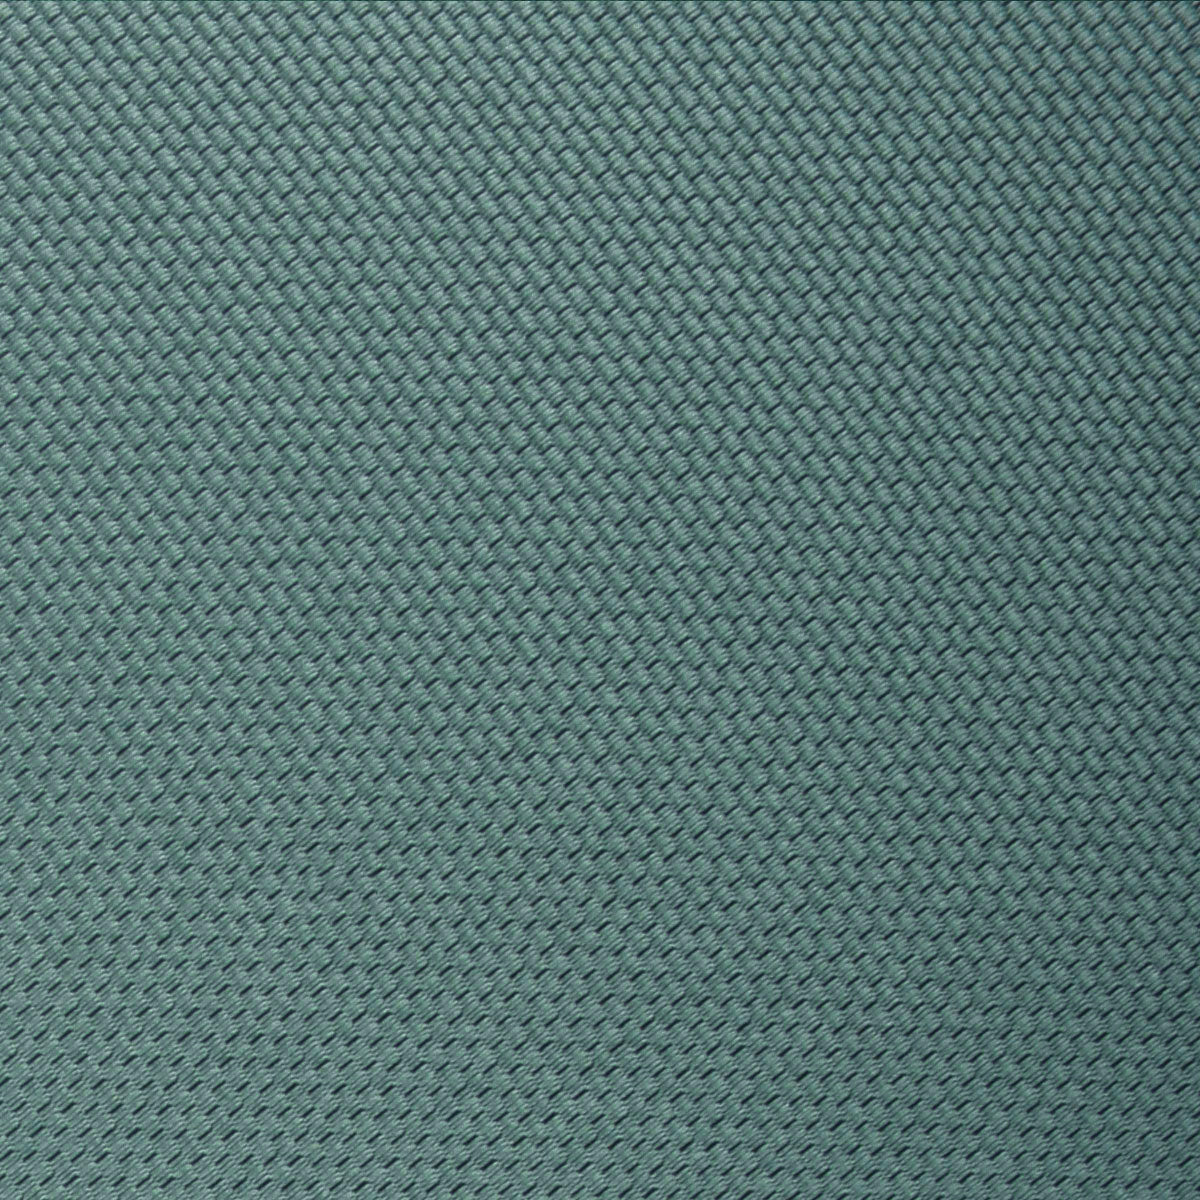 Dusty Teal Blue Weave Fabric Swatch